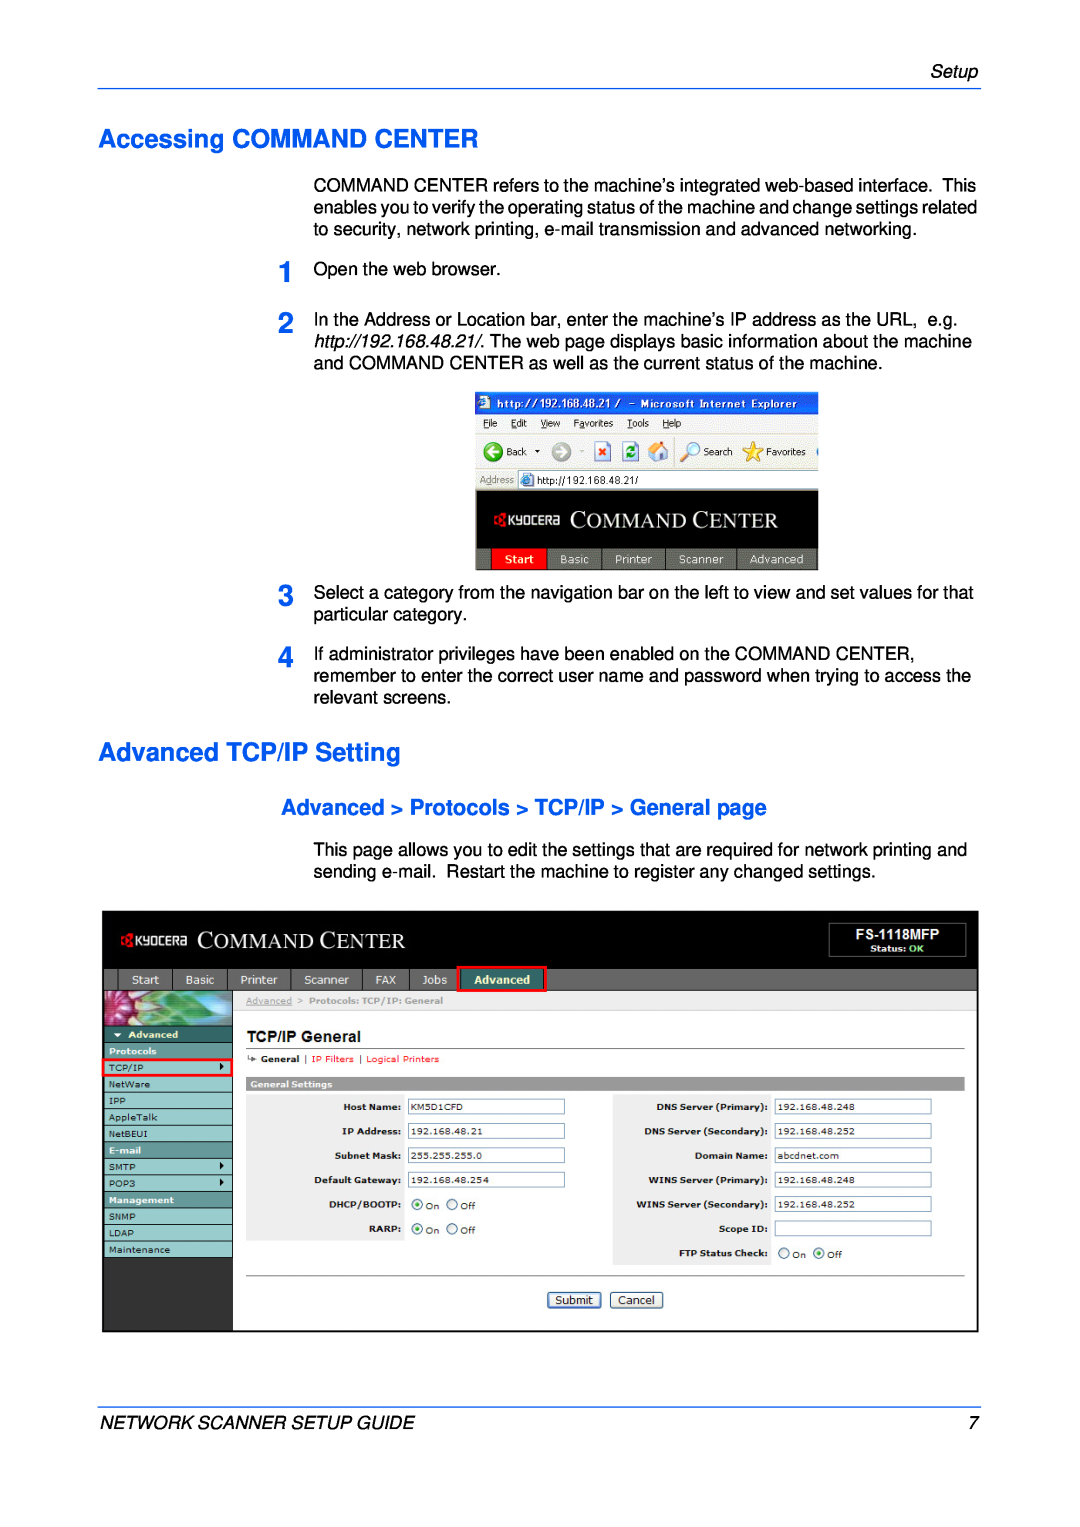 Kyocera FS-1118MFP, KM-1820 Accessing COMMAND CENTER, Advanced TCP/IP Setting, Advanced Protocols TCP/IP General page 